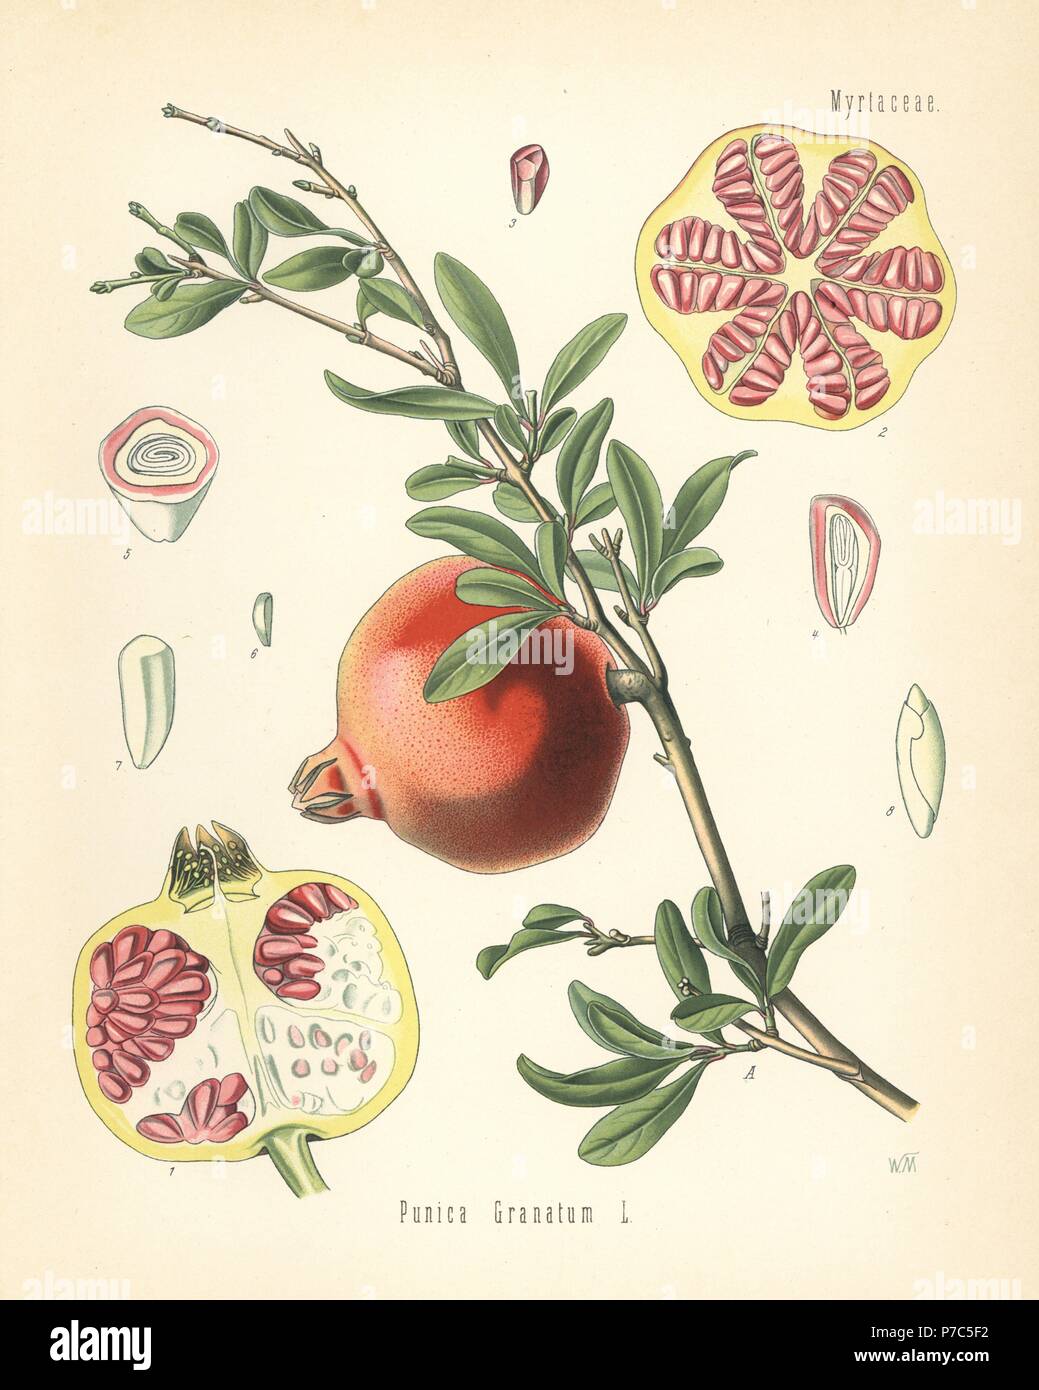 Pomegranate, Punica granatum. Chromolithograph after a botanical illustration by Walther Muller from Hermann Adolph Koehler's Medicinal Plants, edited by Gustav Pabst, Koehler, Germany, 1887. Stock Photo